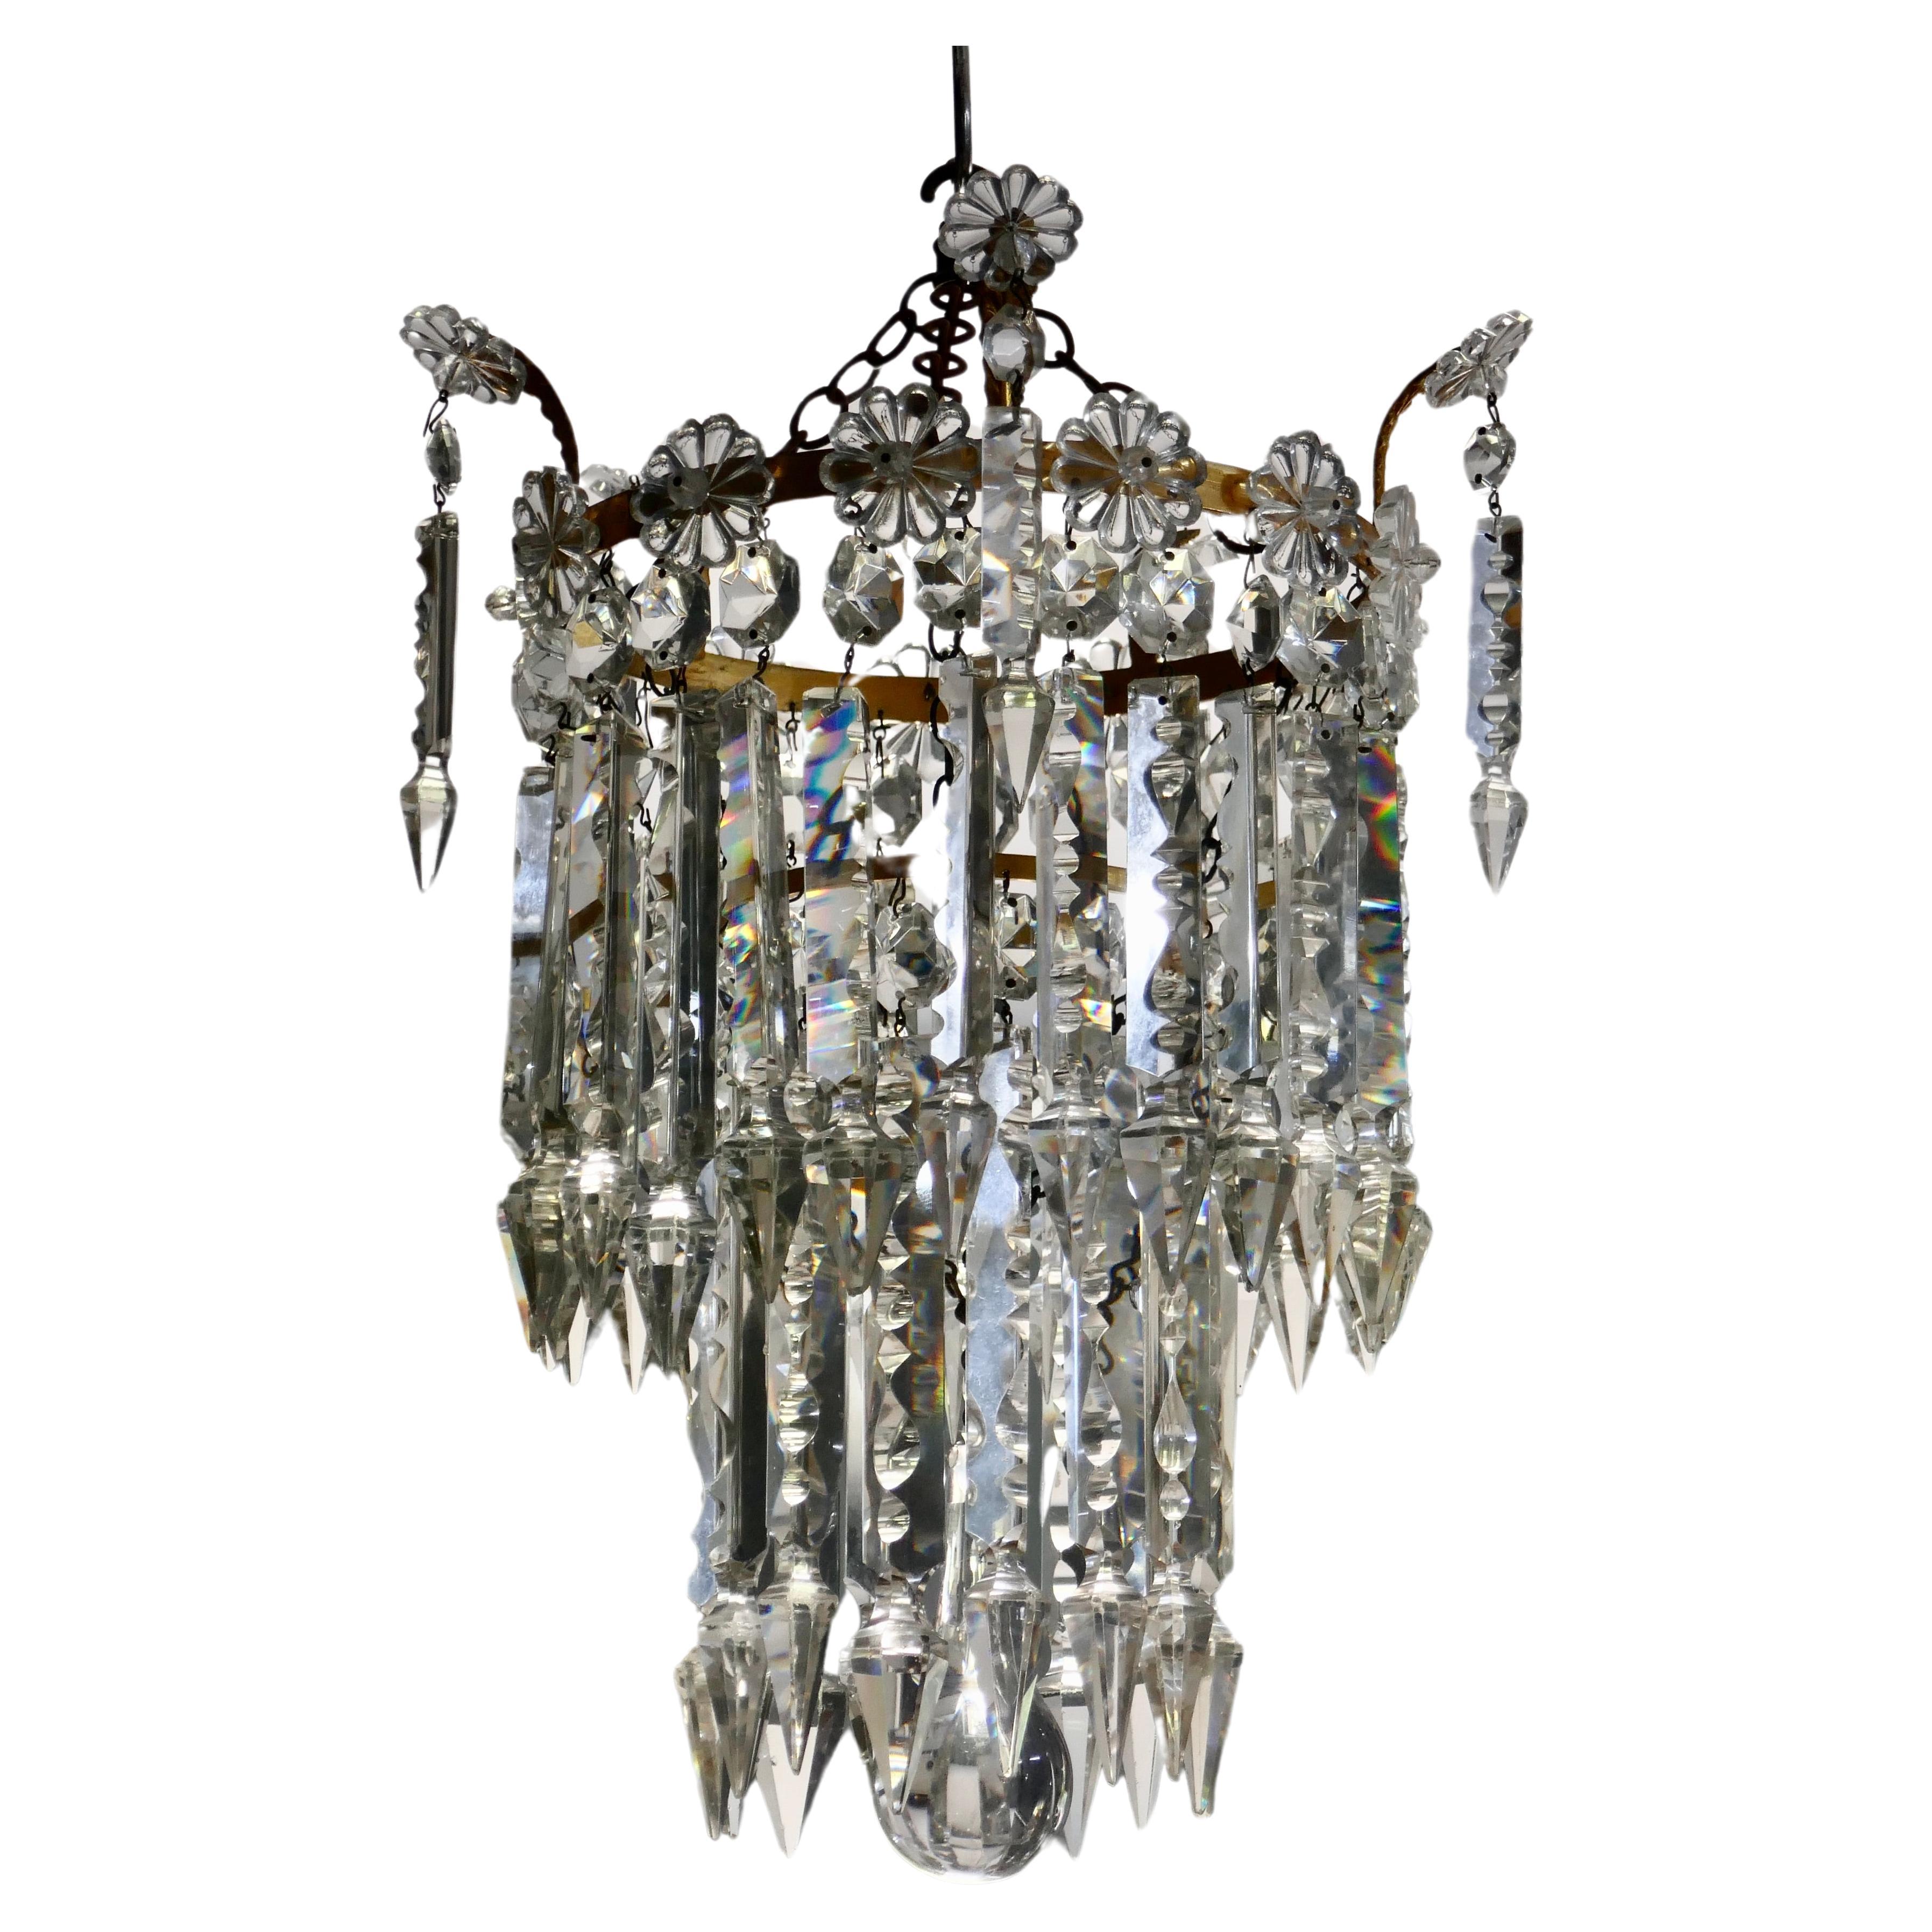 A Stunning Waterfall 2 Tier Crystal Chandelier    For Sale